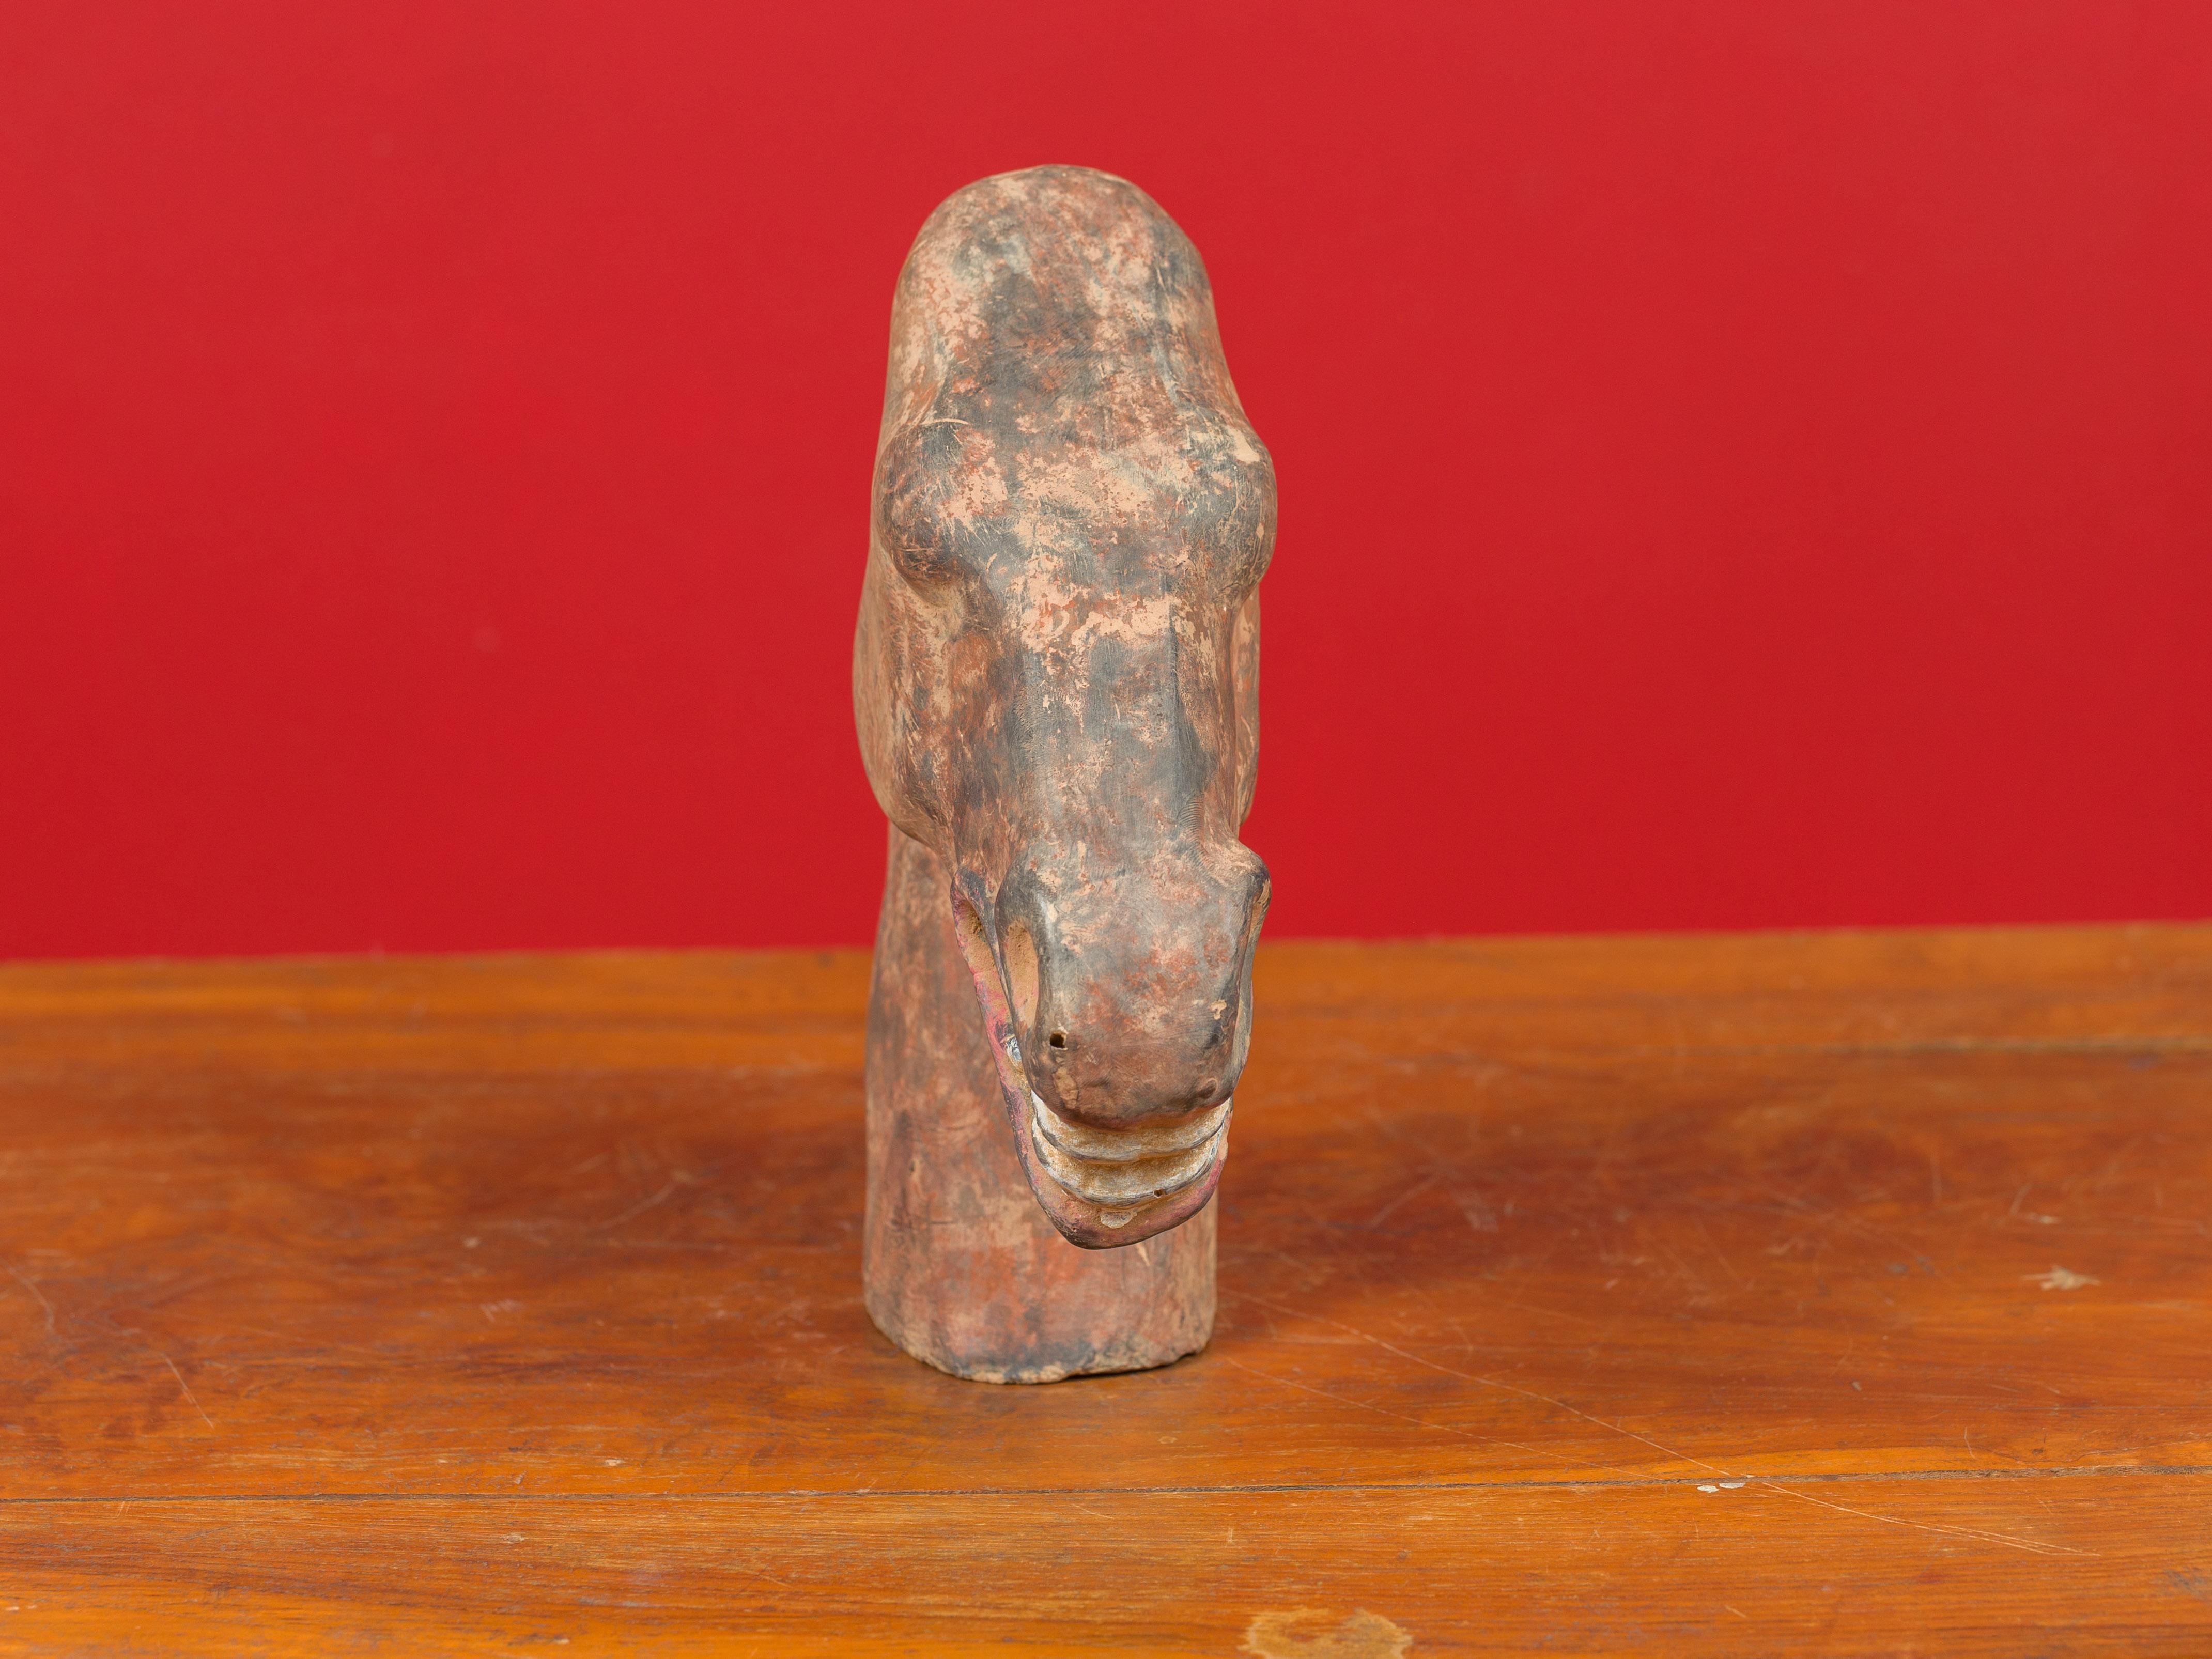 18th Century and Earlier Chinese Han Dynasty Terracotta Horse Head Sculpture, circa 202 BC-200 AD